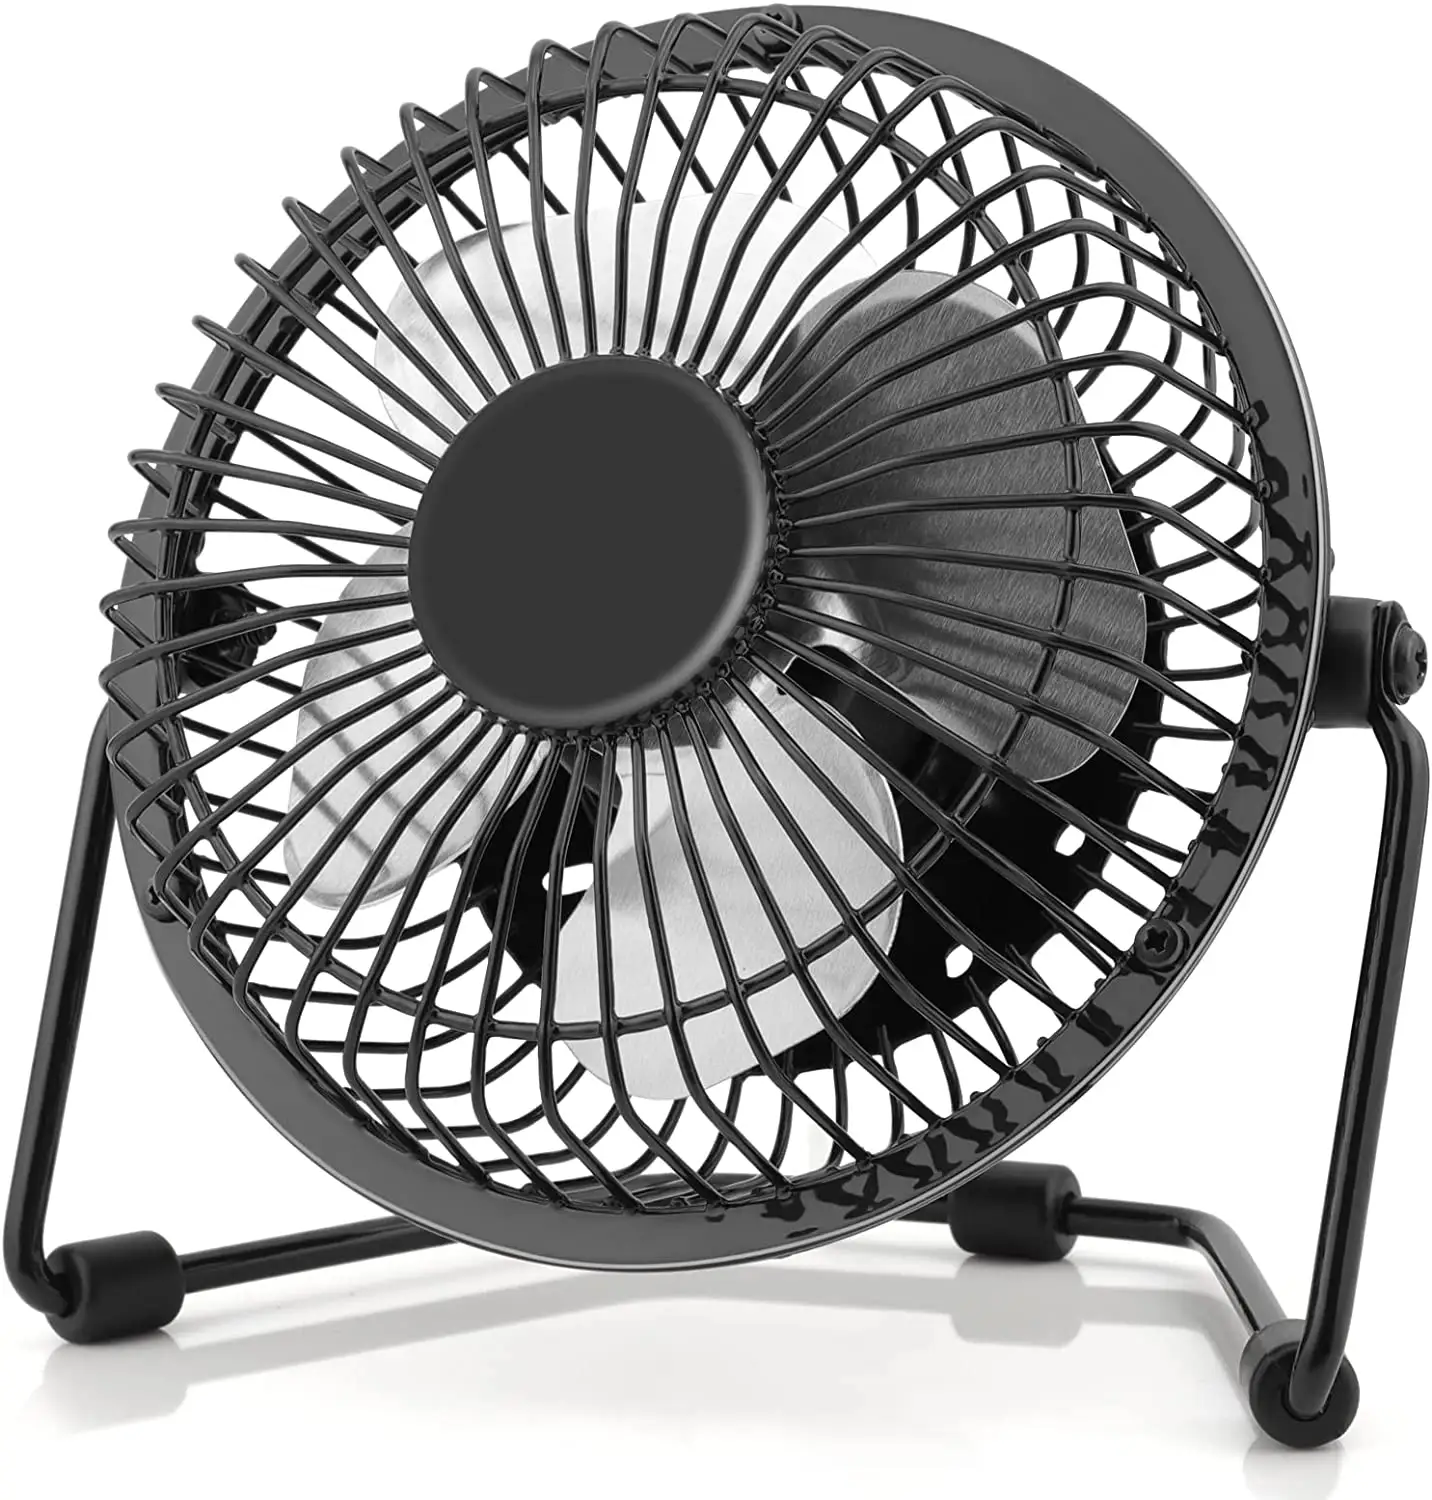 Mini Quiet Metal Construction & Strong Airflow & 360 Adjustable Angle Personal Cooling4/6 Inch Small USB Desk Fan for Desktop